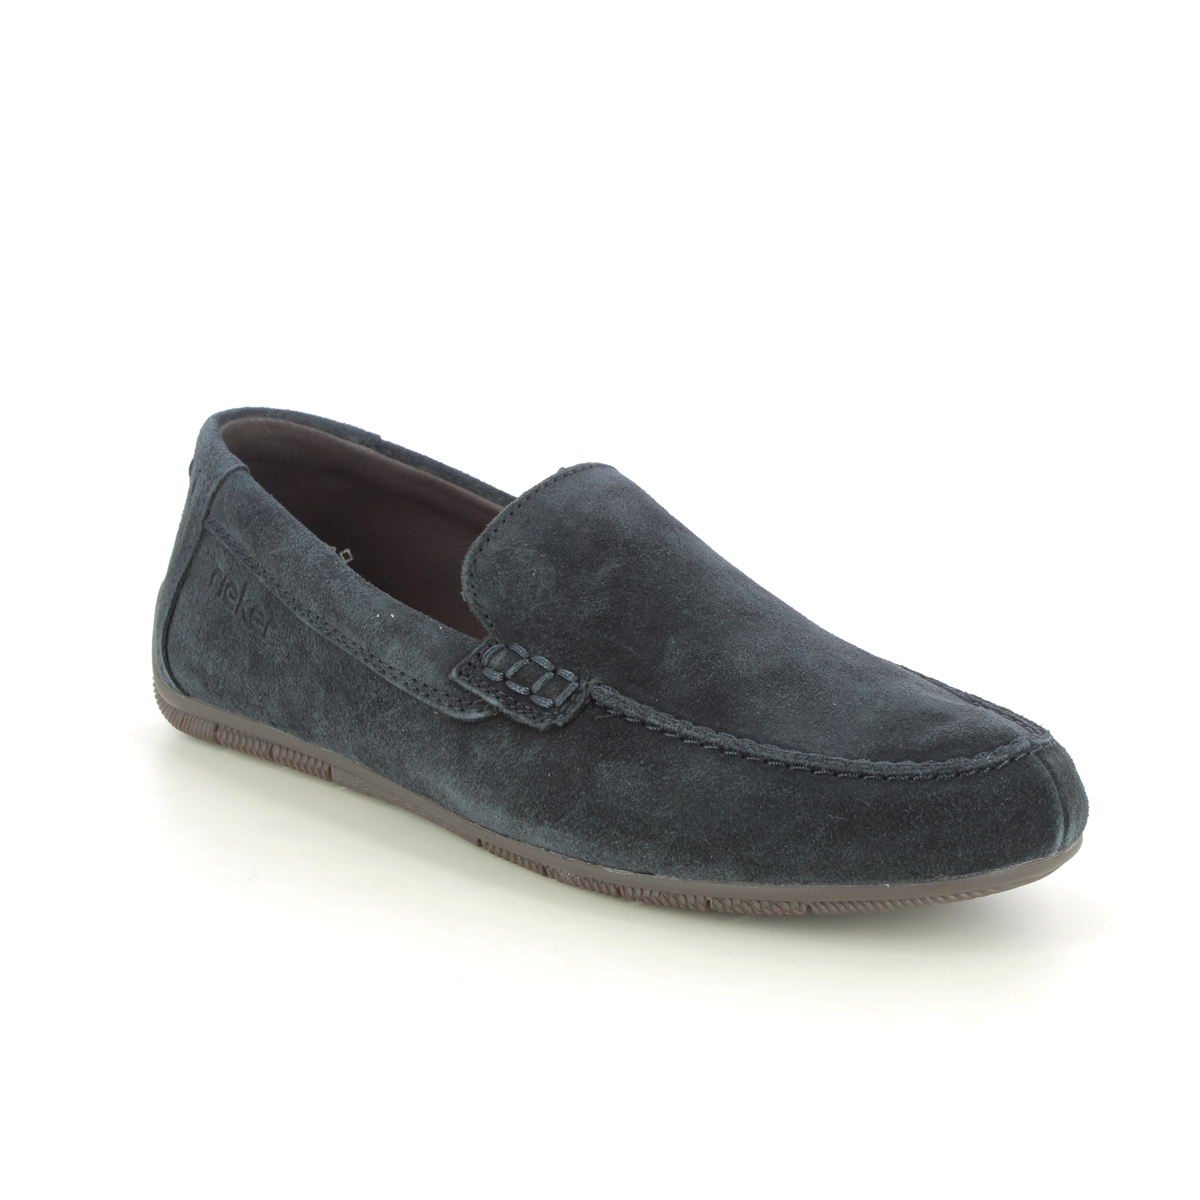 Rieker 09557-14 Navy Suede Mens Loafers in a Plain Leather in Size 43